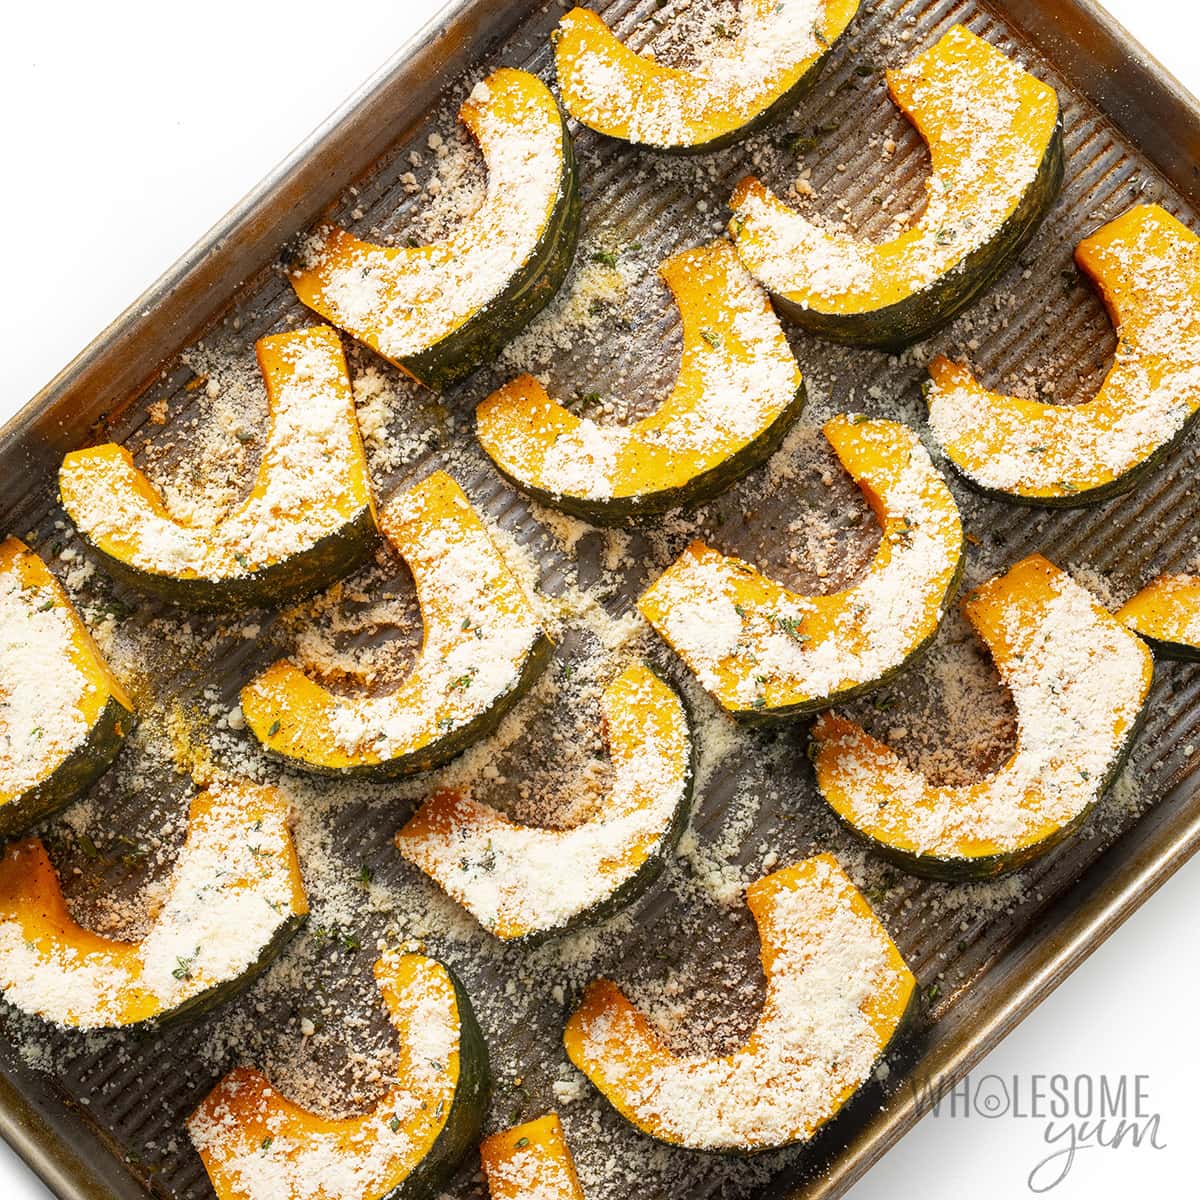 Buttercup squash sprinkled with seasonings.